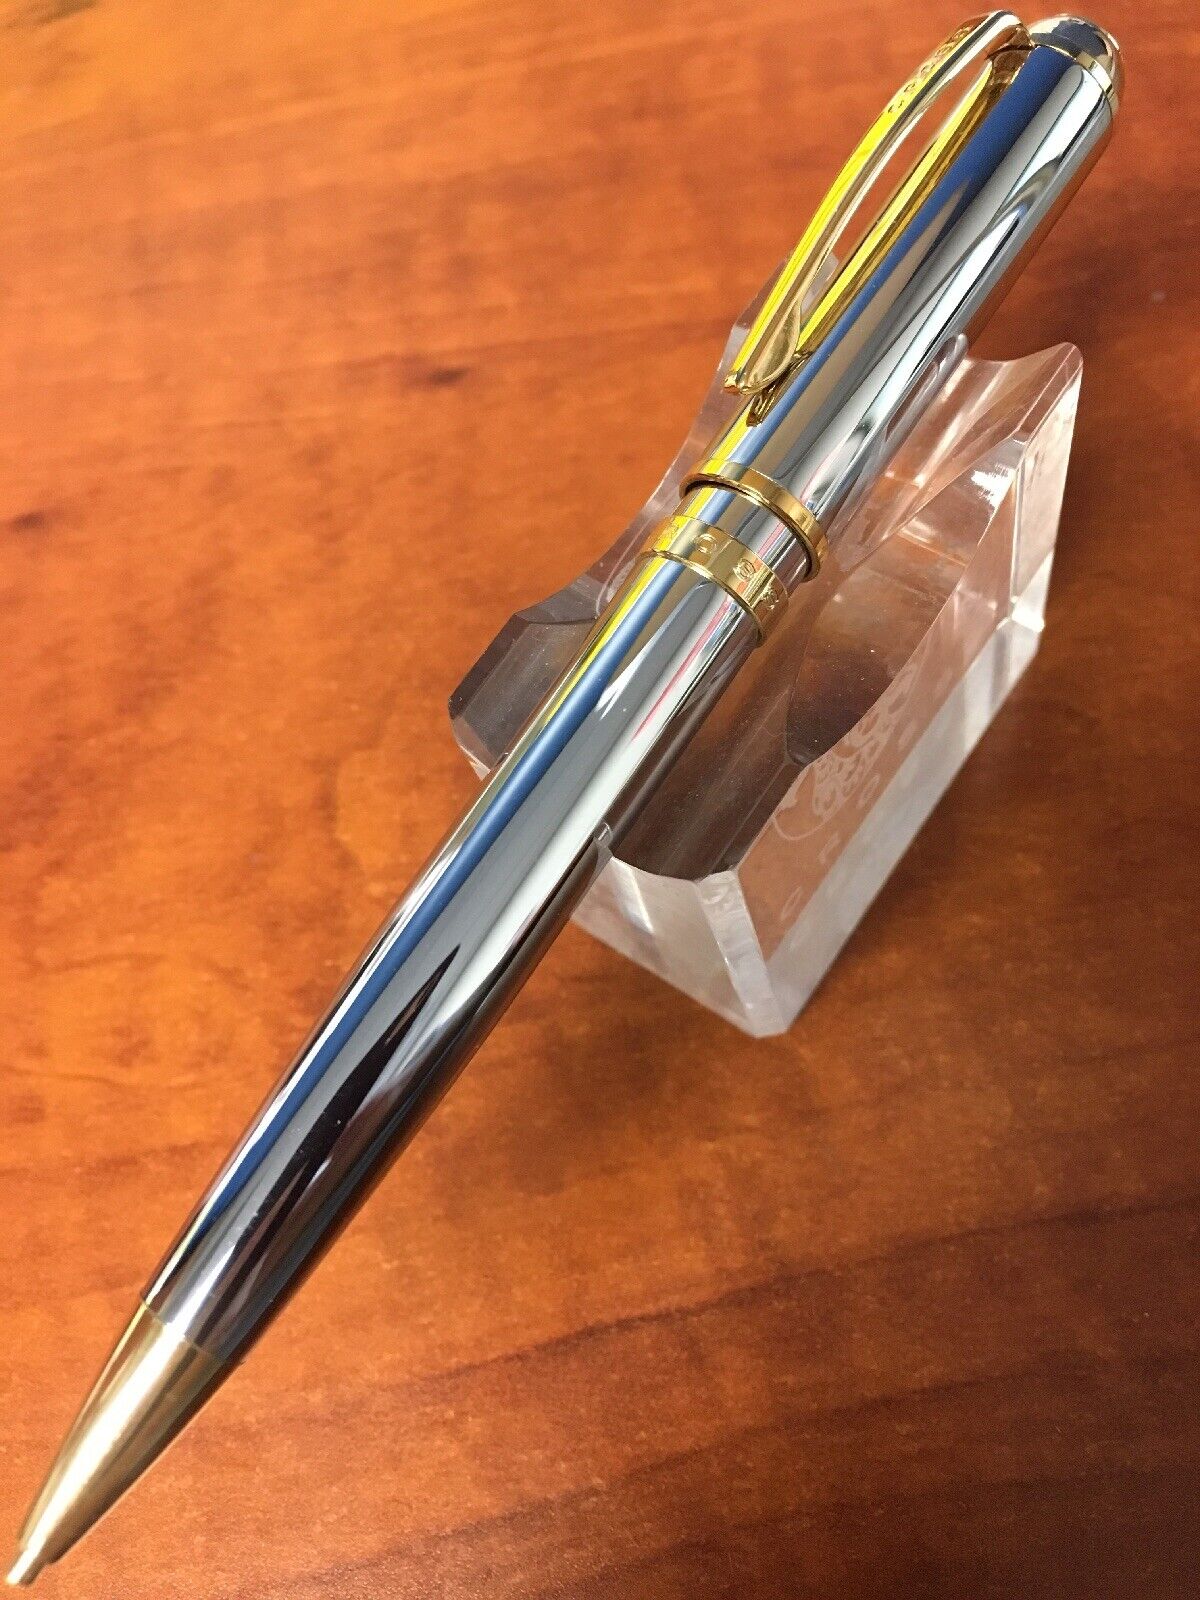 Cross Athens Chrome w/Gold Plate 0.7mm Pencil